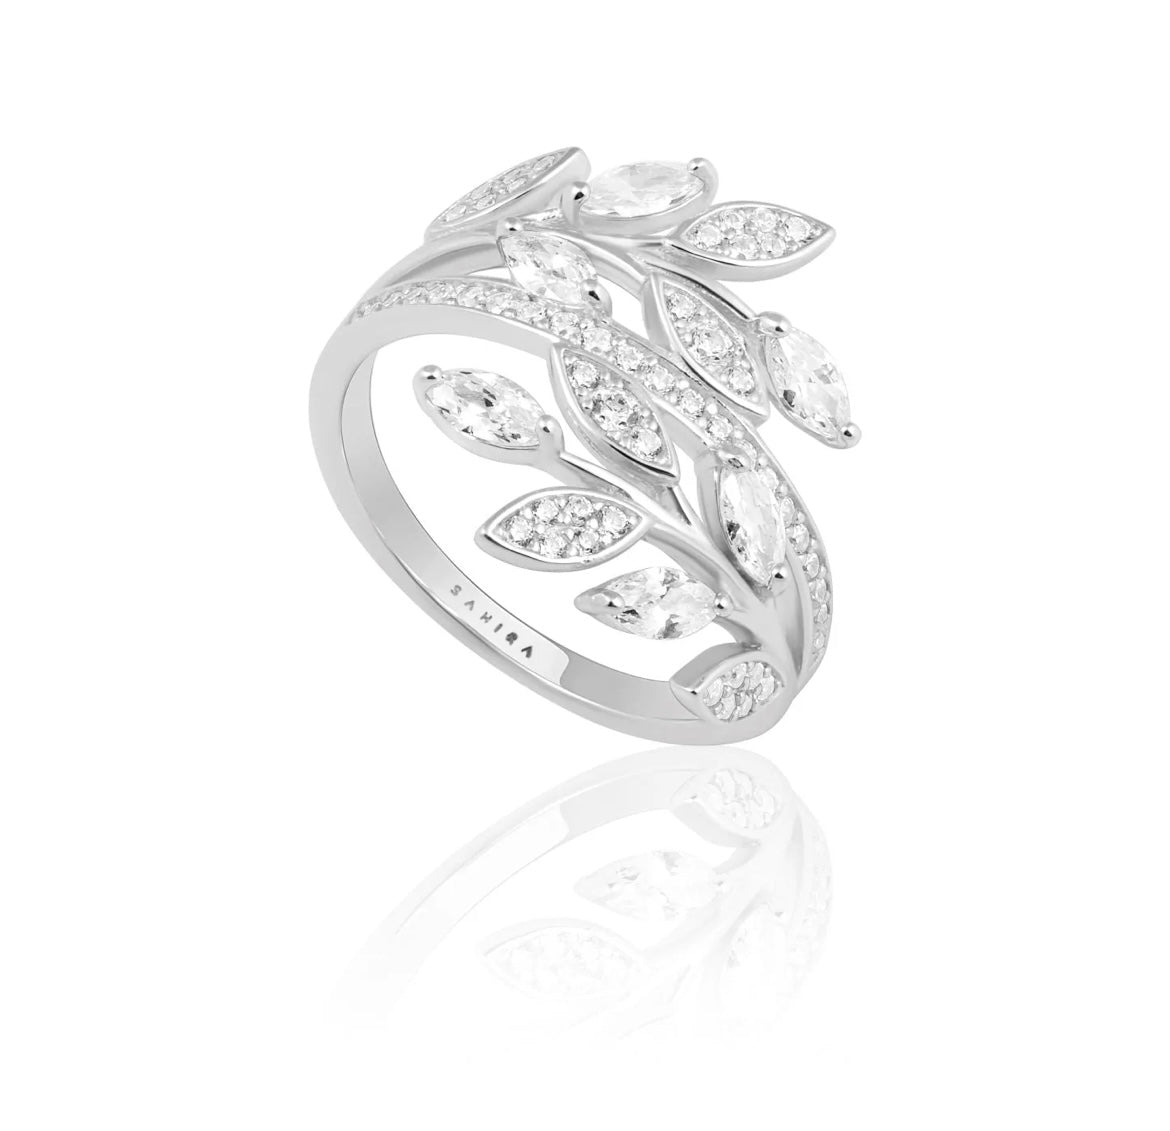 Eve wrap ring